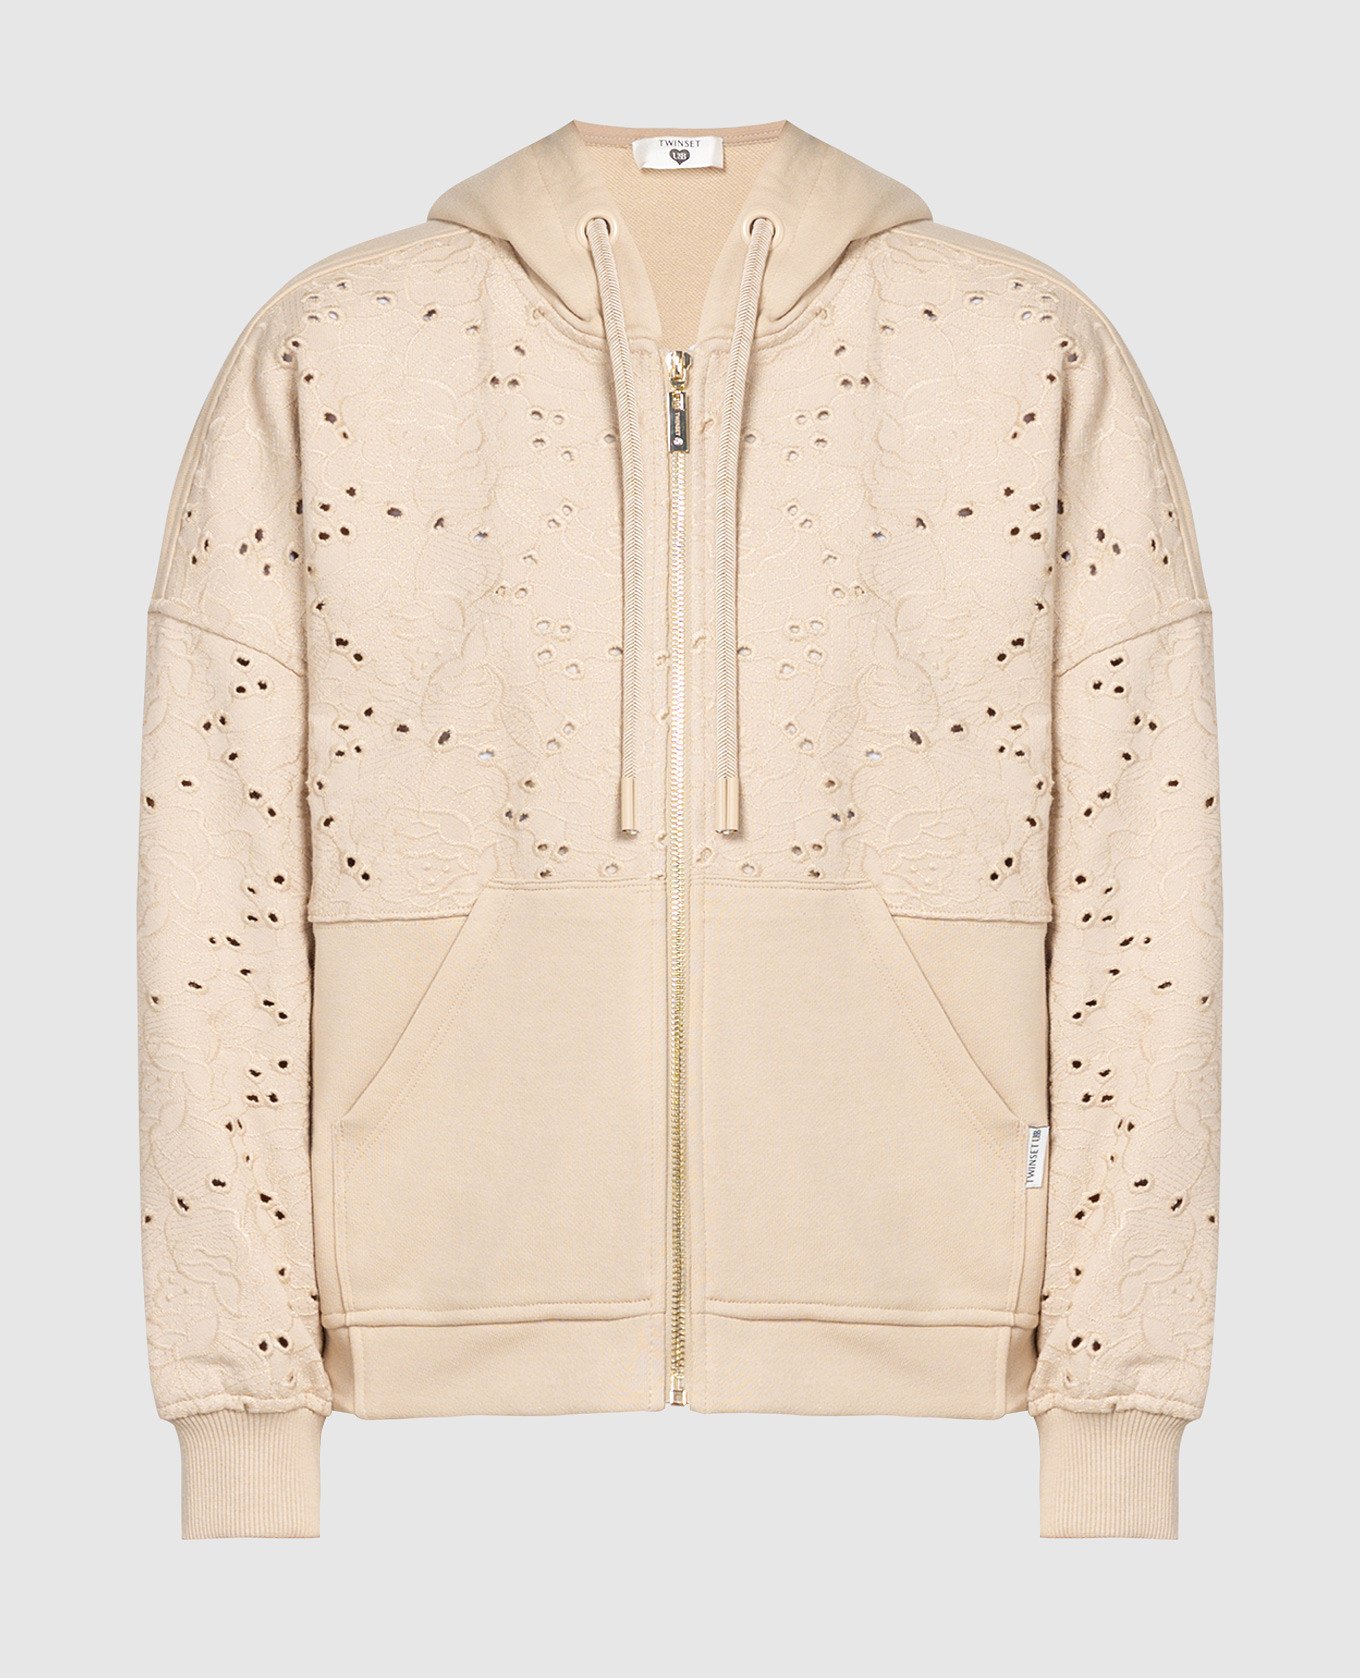 Beige sports jacket with embroidery